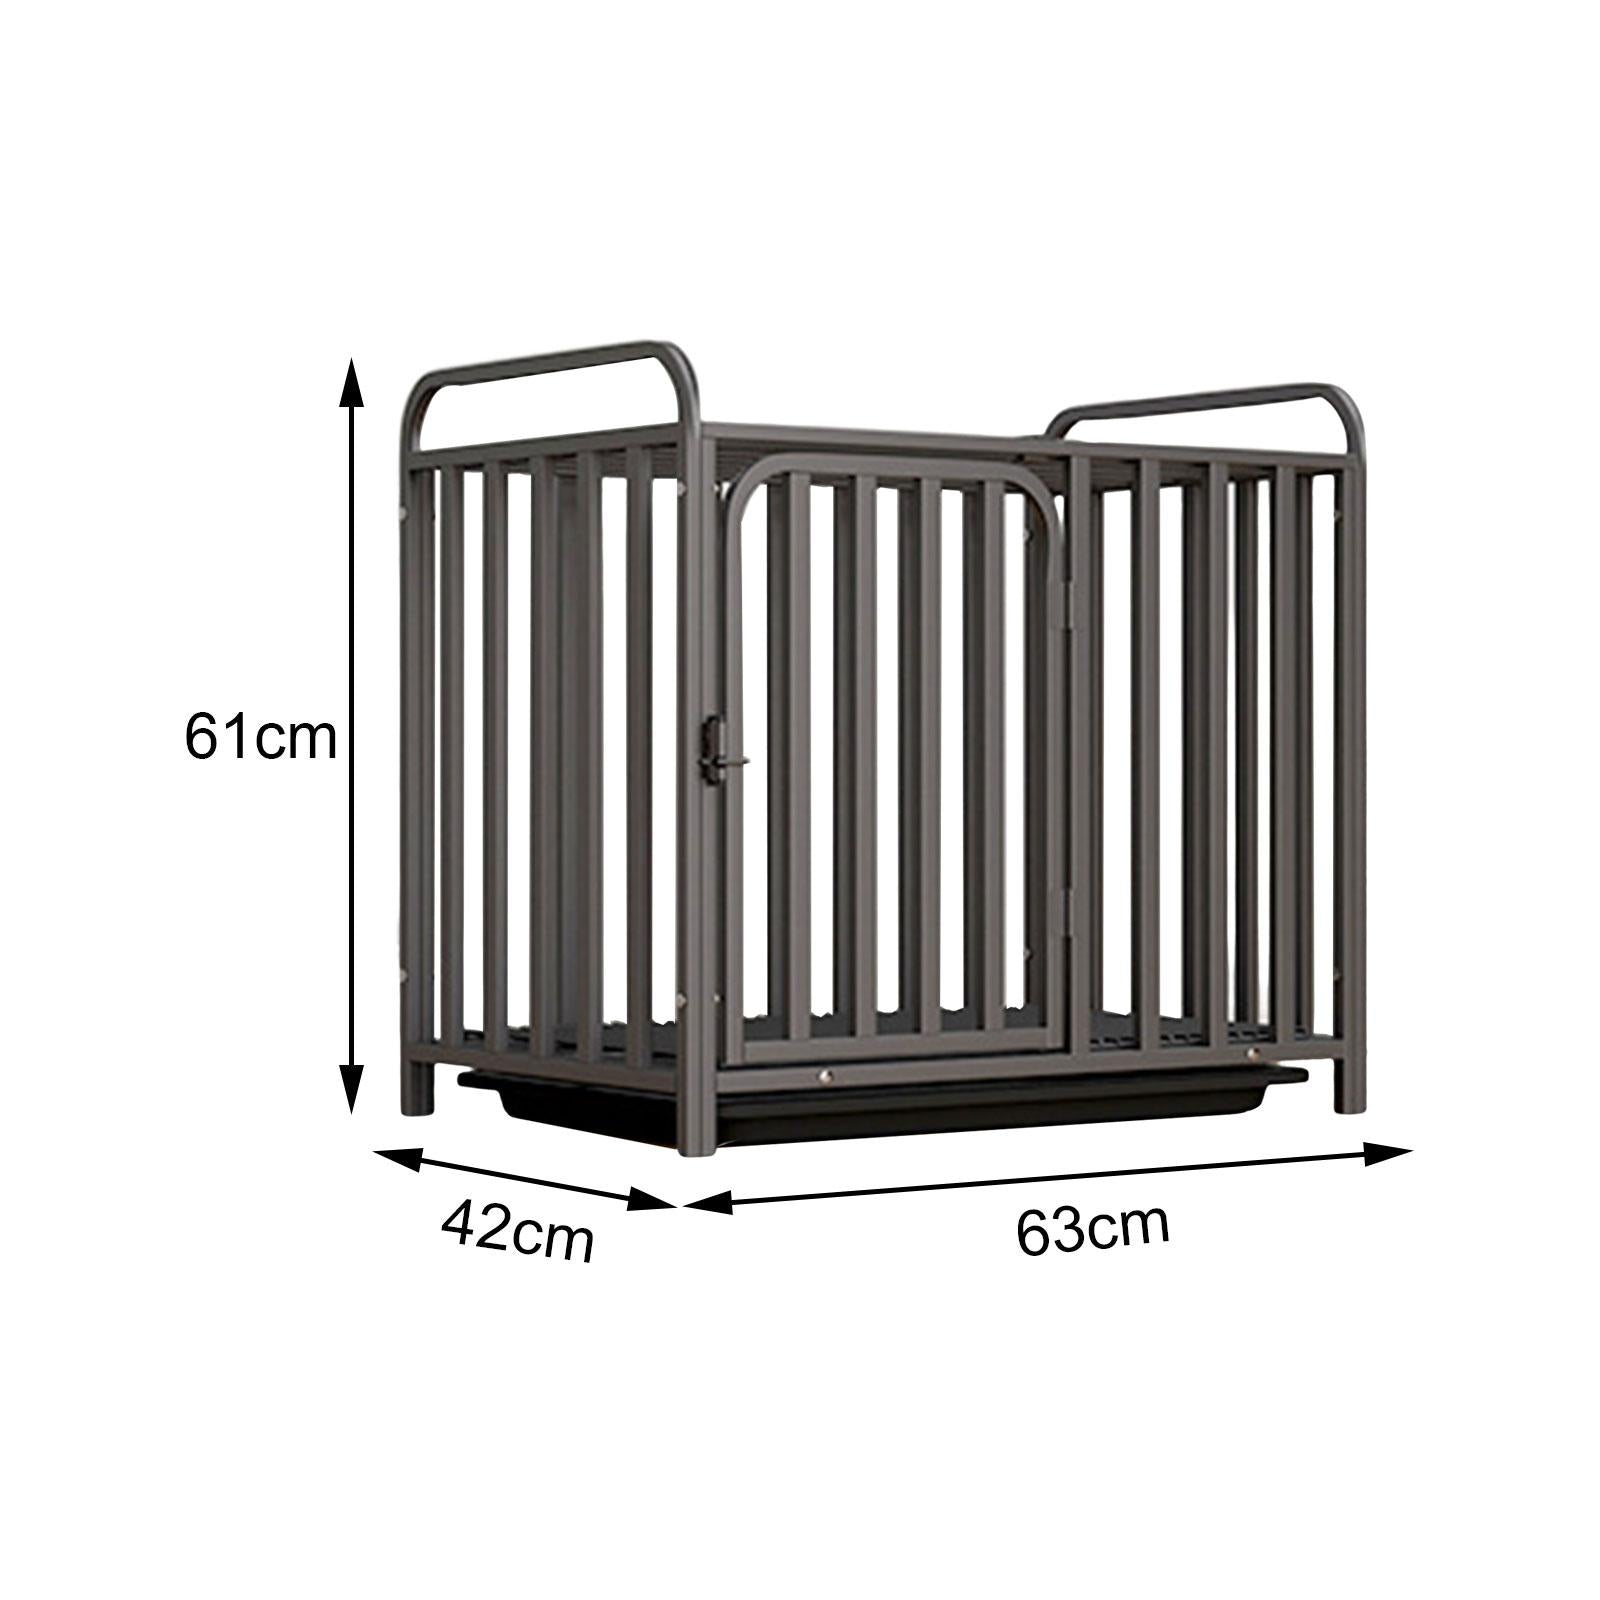 Heavy Duty Dog Crate， Pet Carrier Flat Top Easily to Install with Tray Dogs Kennels Sturdy Black Metal Dog Cage for Indoor Outdoor Small Dog